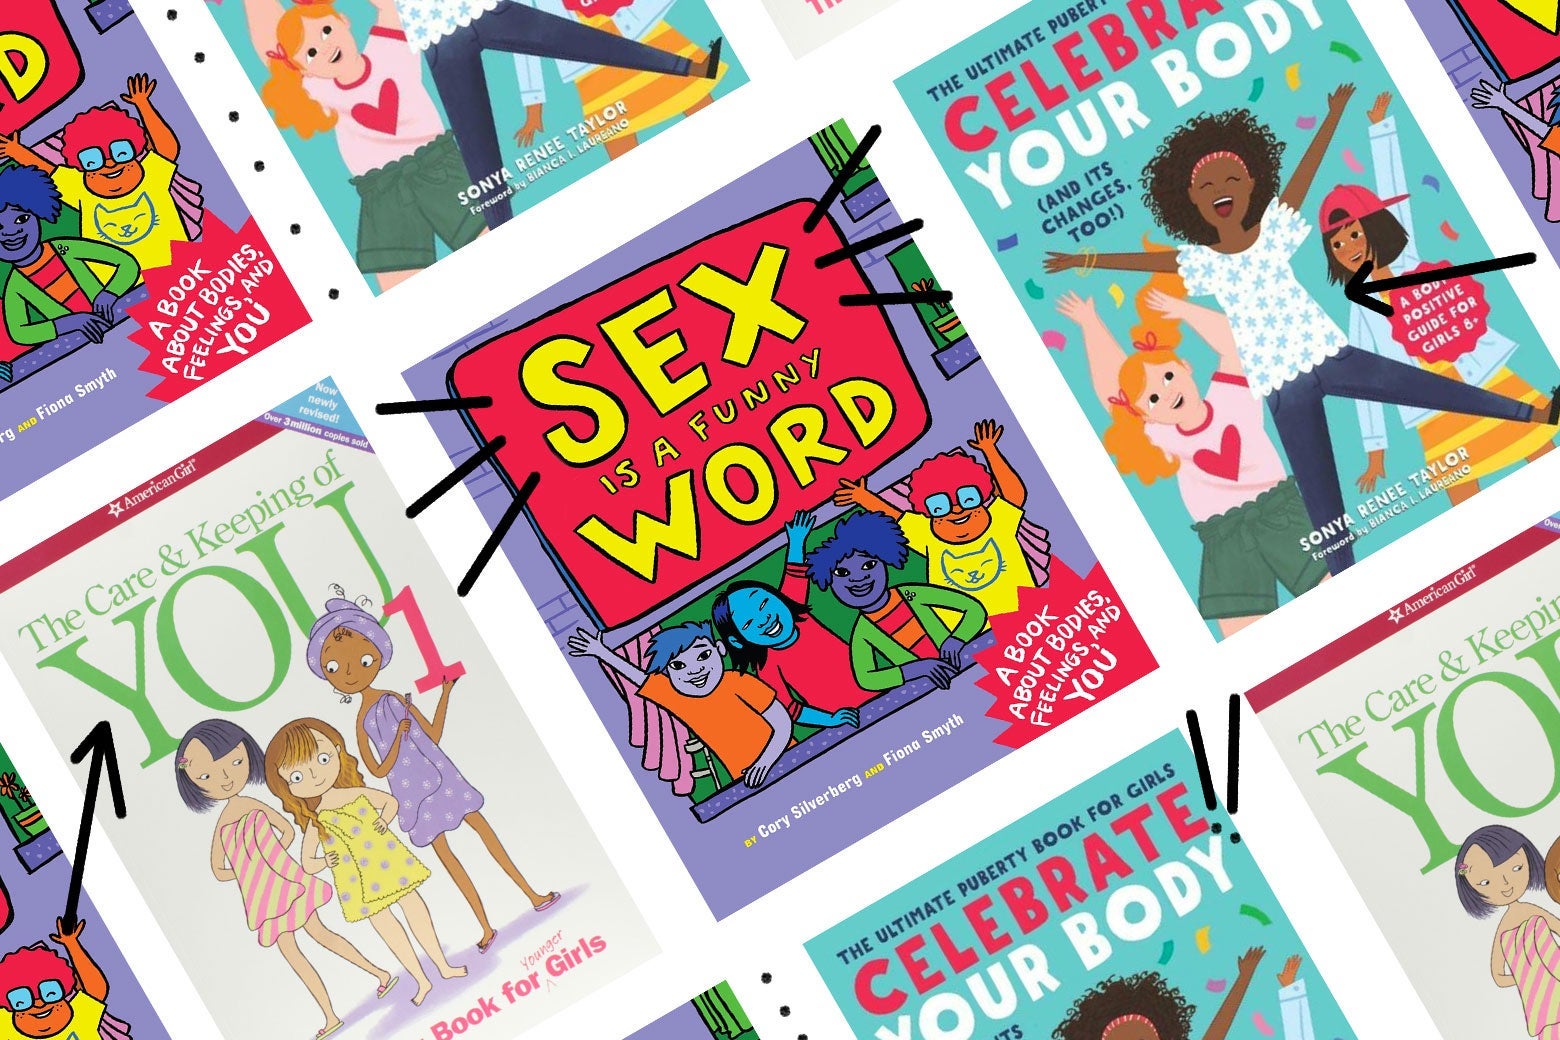 The best puberty books for girls.